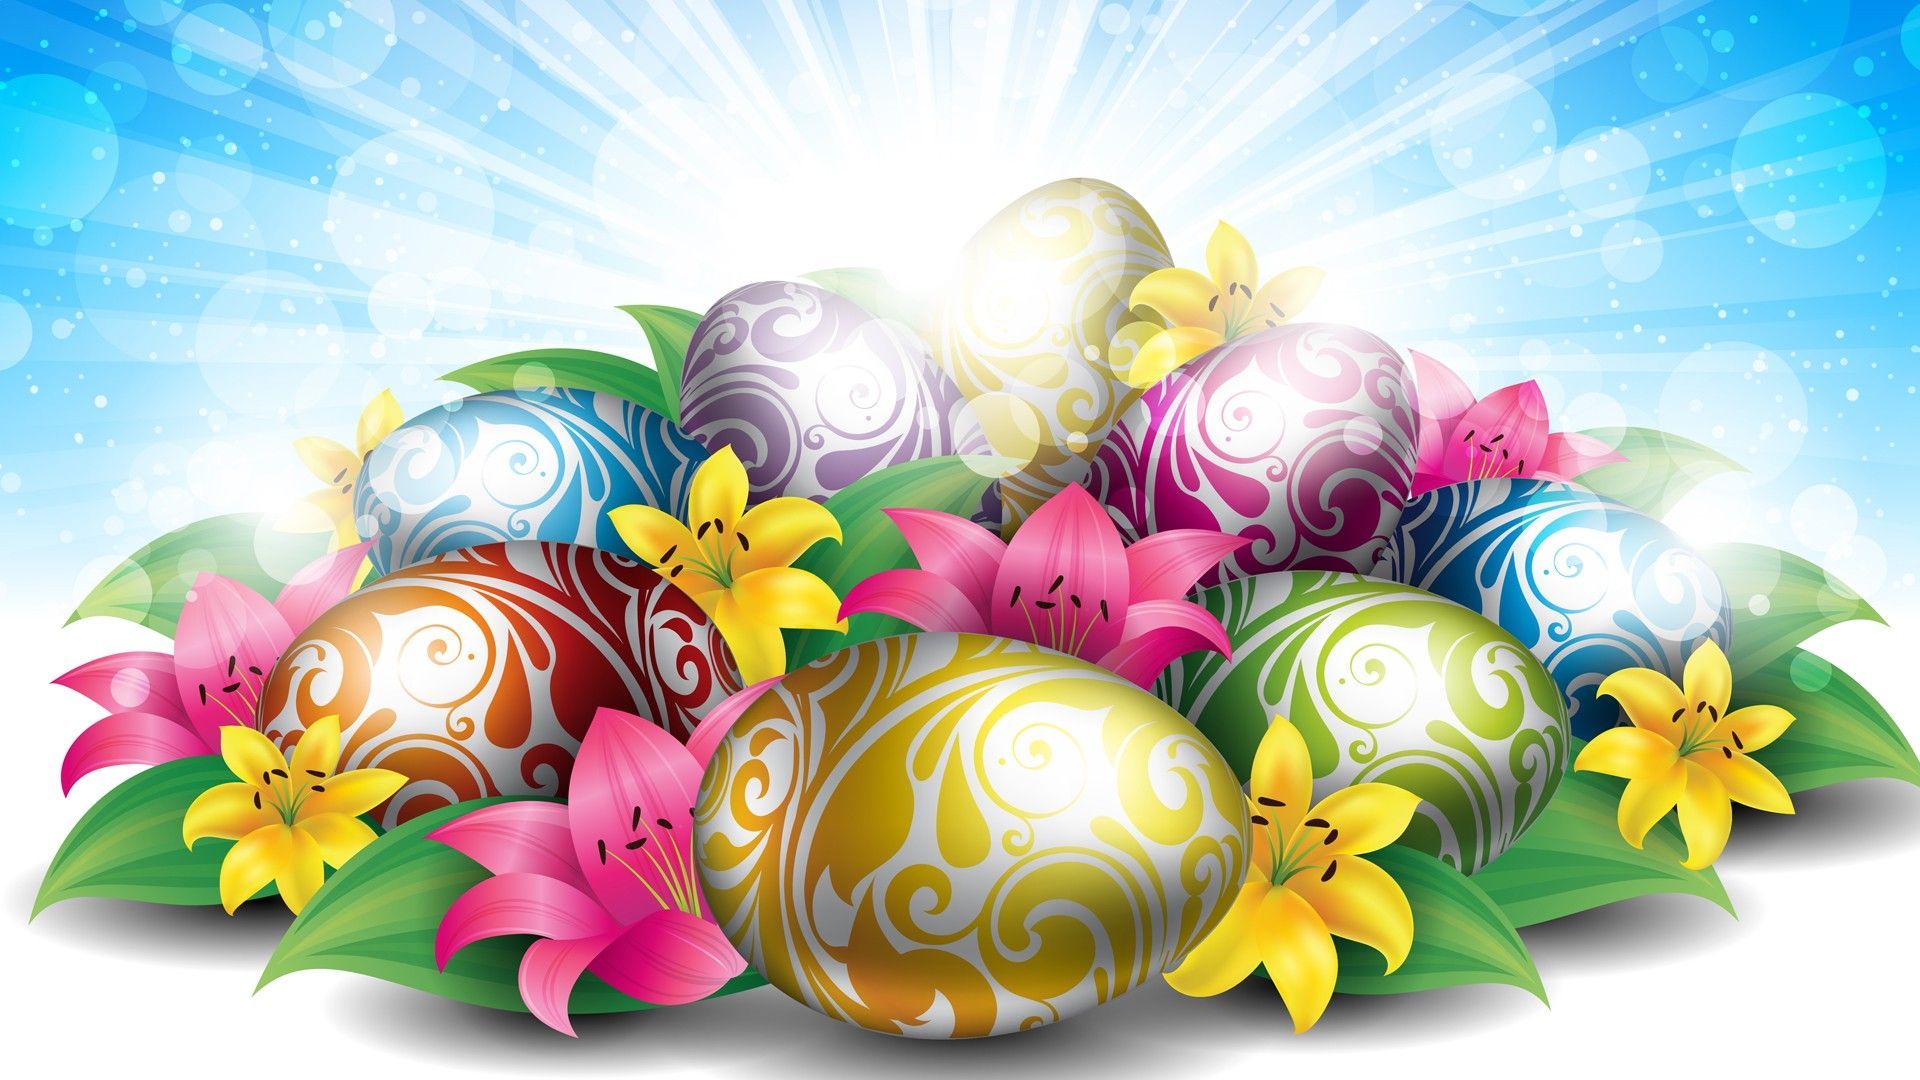 Happy Easter Picture 2020. Easter wallpaper, Easter